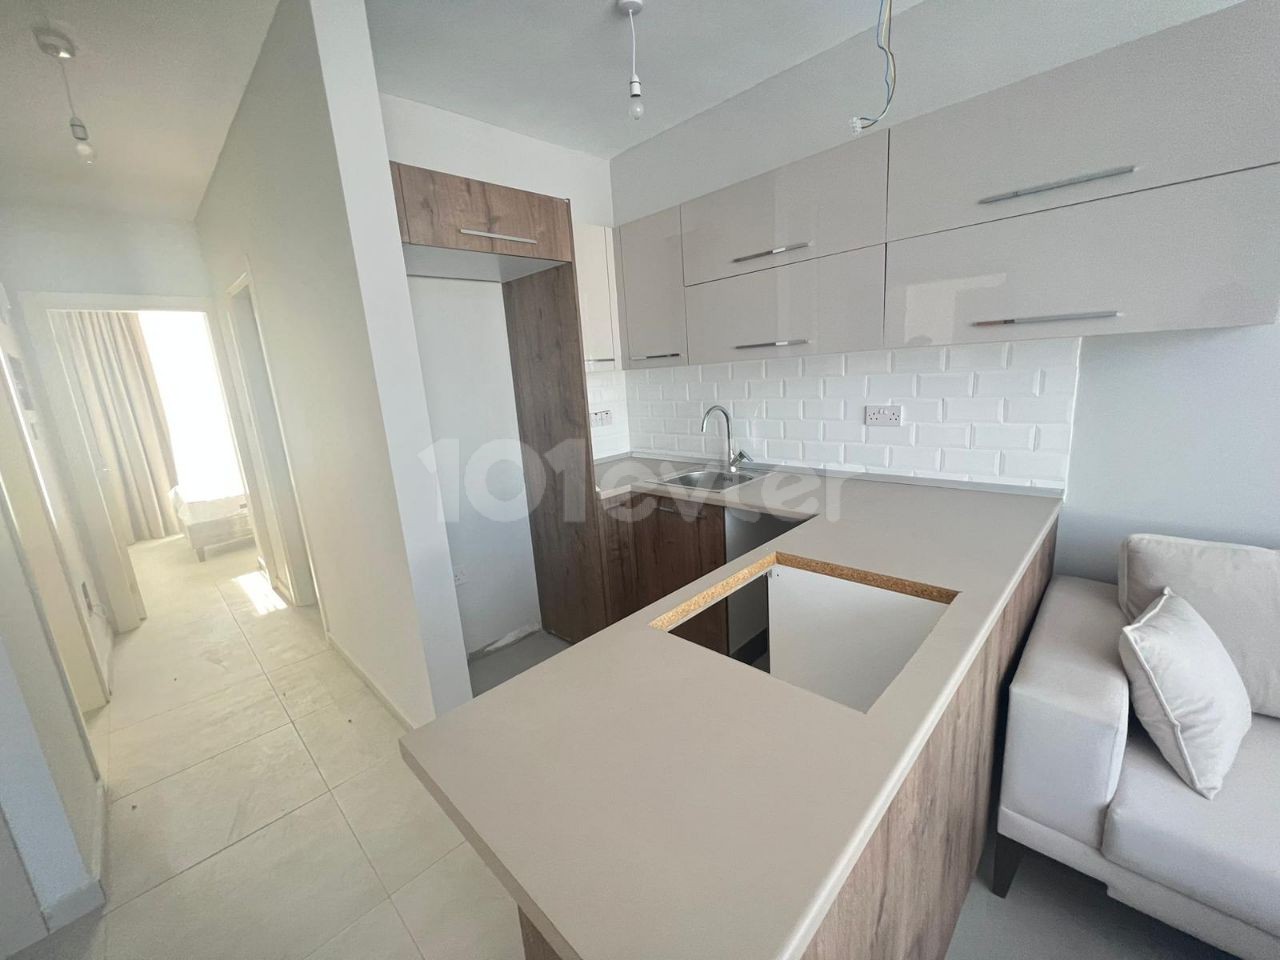 OUR ANAHTRA TELISIM 2+1 OPPORTUNITY FLAT IN GIRNE ALSANCAK REGION WITH 50% PAYMENT!